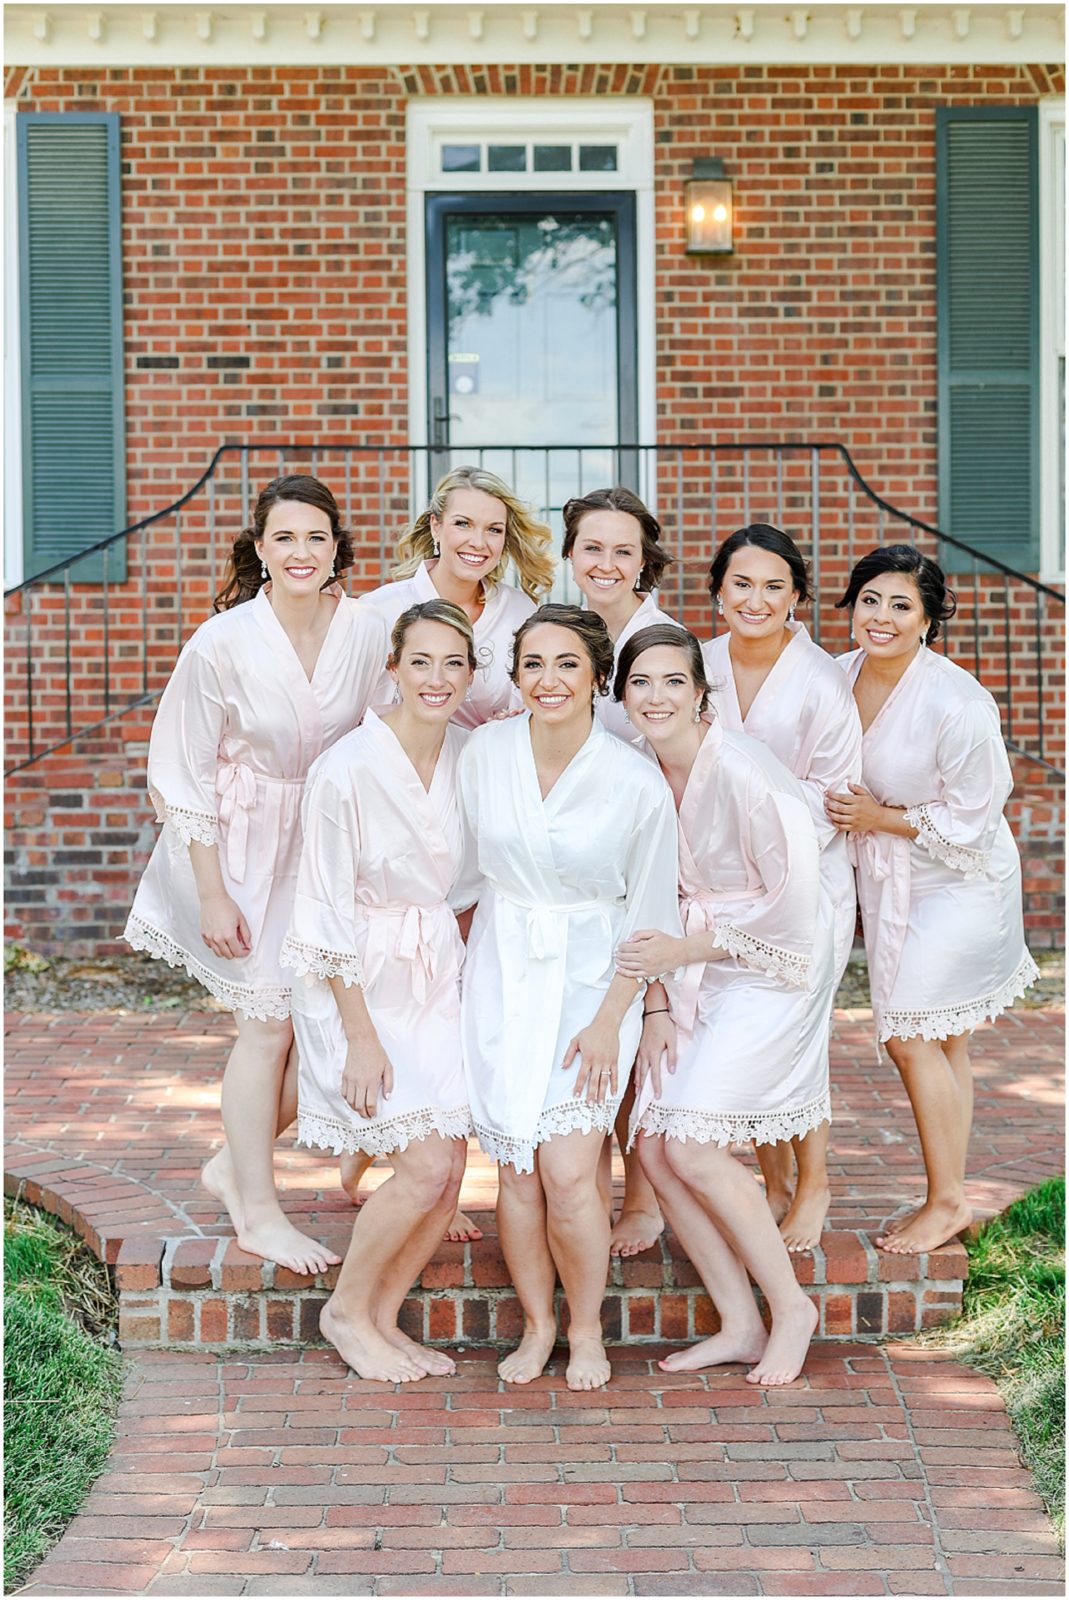 bridal party wearing robes for photos